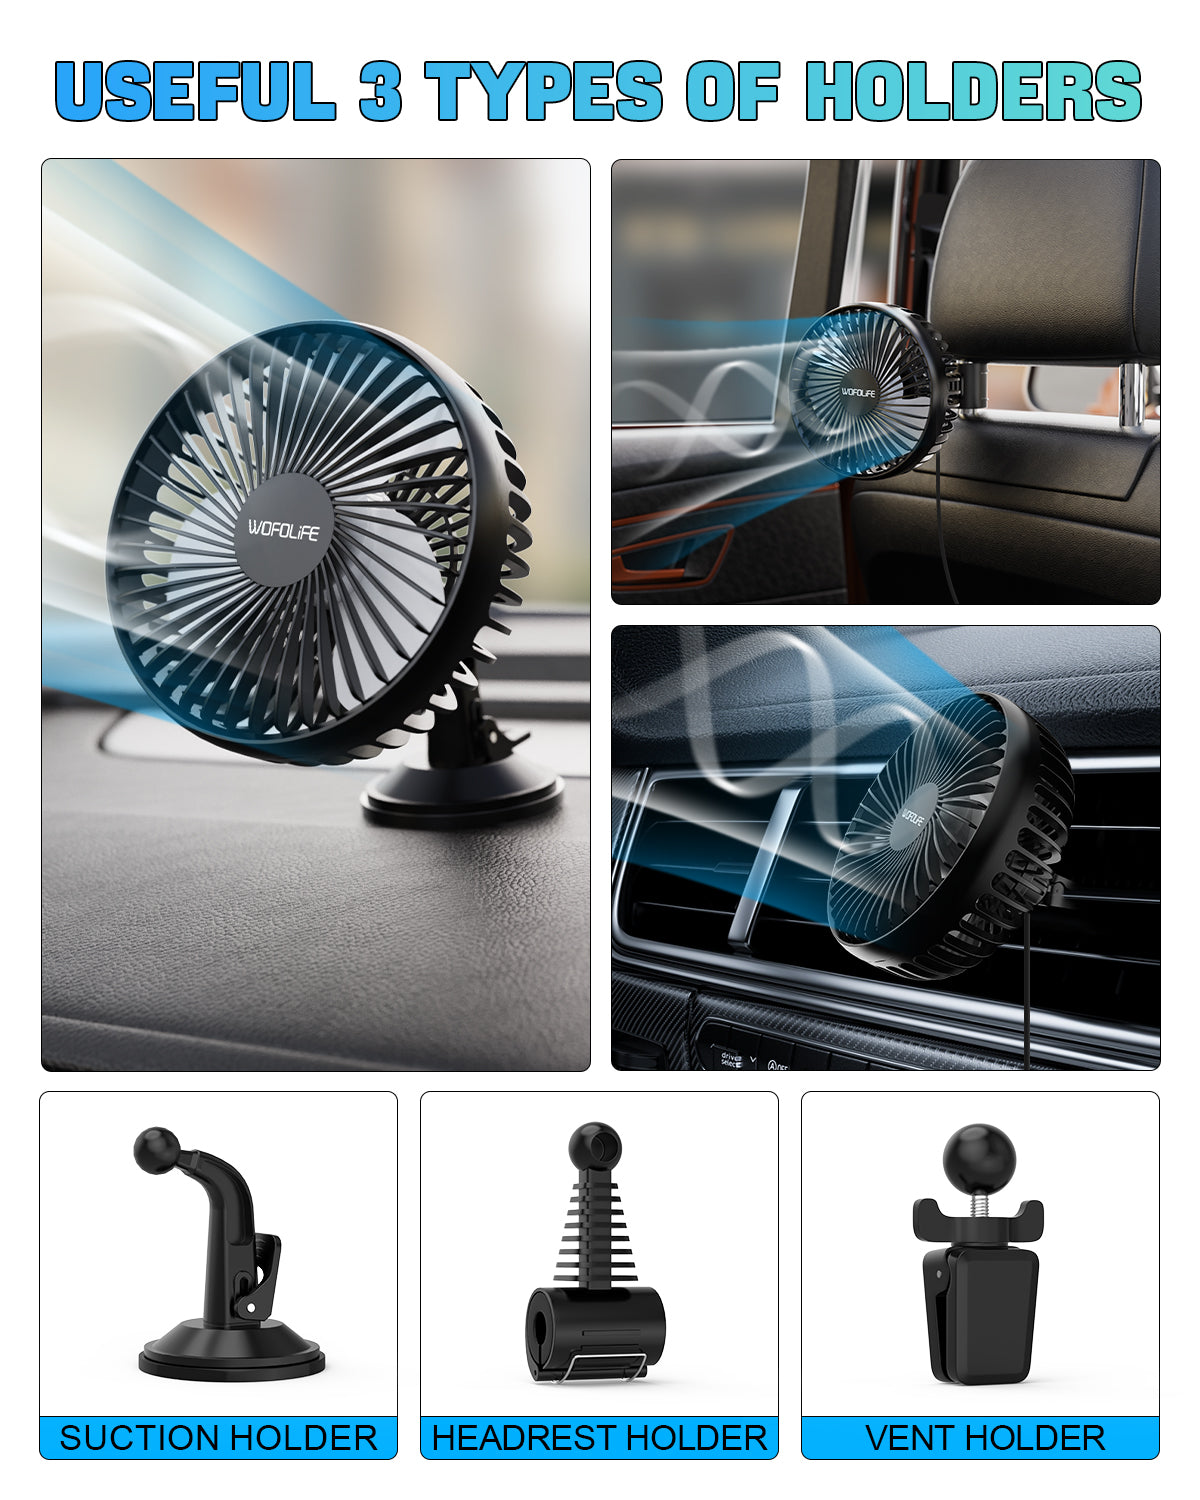 WOFOLiFE USB Car Fan with 3 Holders, 3 Speed Adjustable, USB Powered